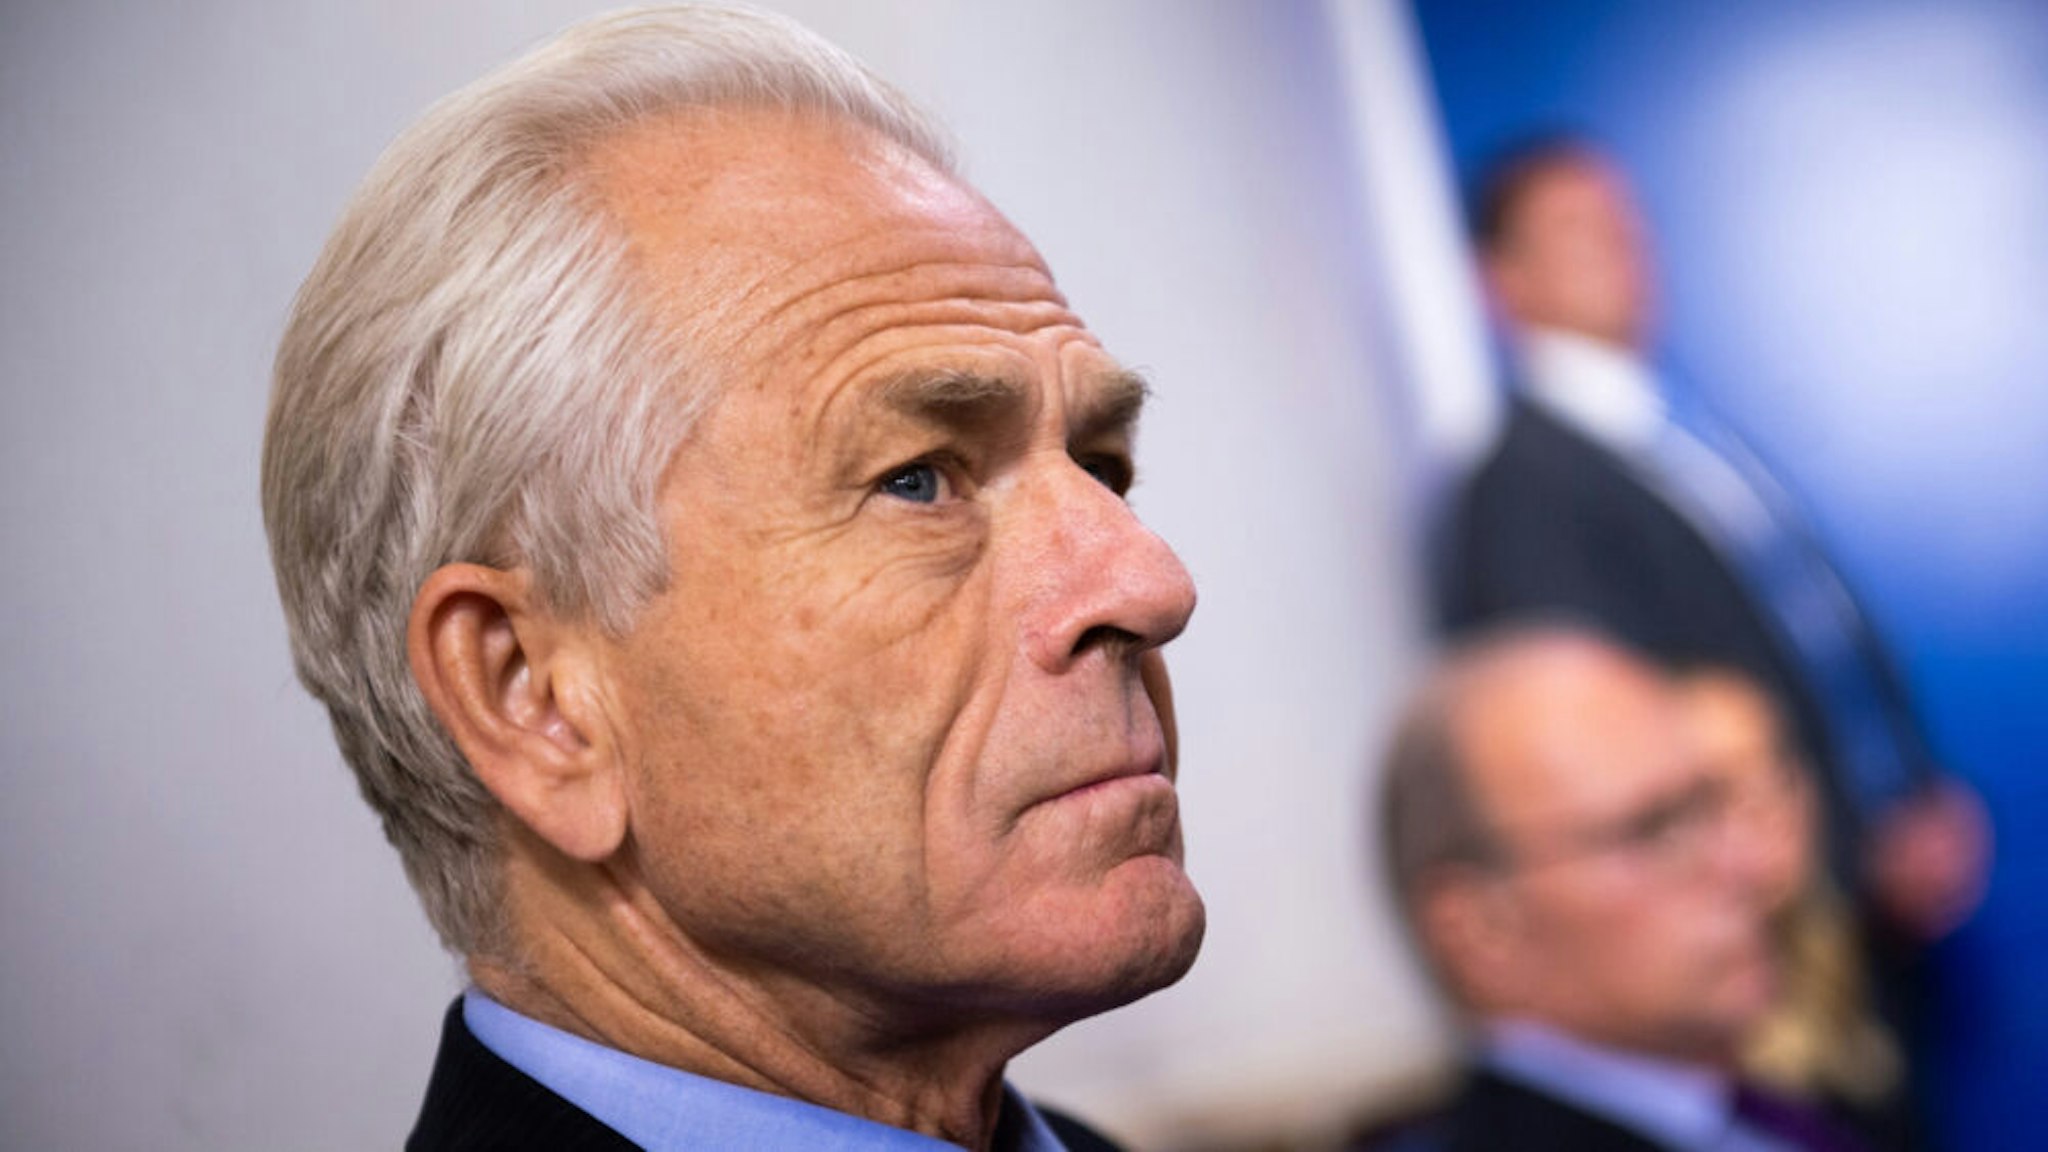 Peter Navarro, director of the National Trade Council, listens as U.S. President Donald Trump, not pictured, speaks during a news conference in the James S. Brady Press Briefing Room at the White House in Washington, D.C., U.S., on Friday, Aug. 14, 2020. Trump announced a collaboration with McKesson Corp. to aid in vaccine distribution.